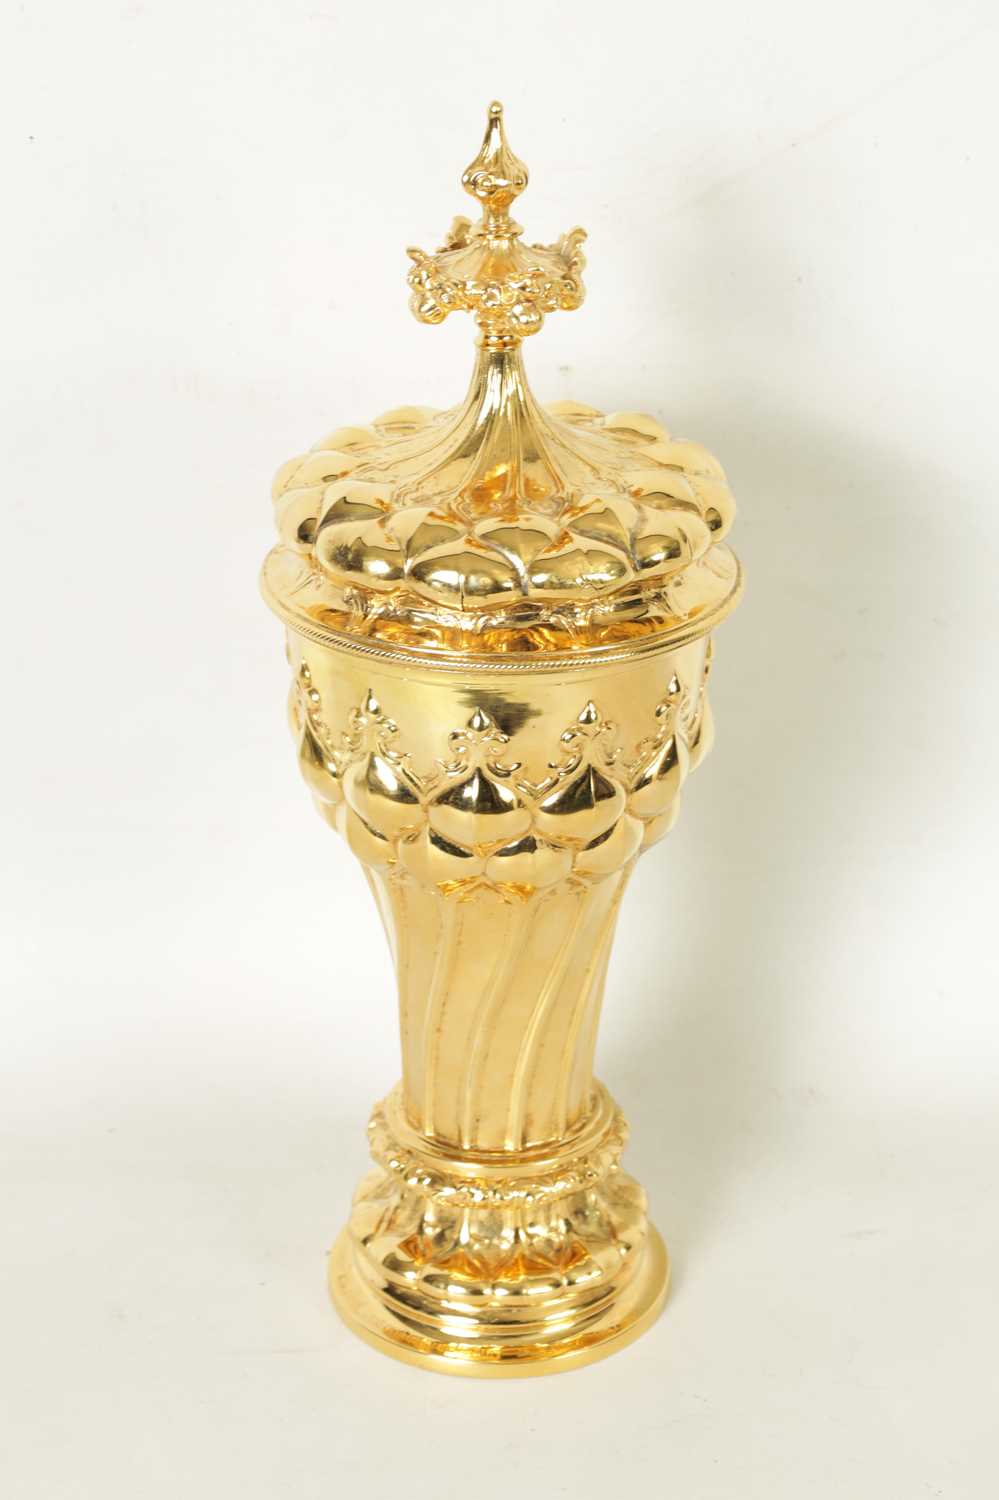 AN ART DECO GOTHIC REVIVAL CONTINENTAL SILVER GILT PRESENTATION CUP AND COVER - Image 7 of 10